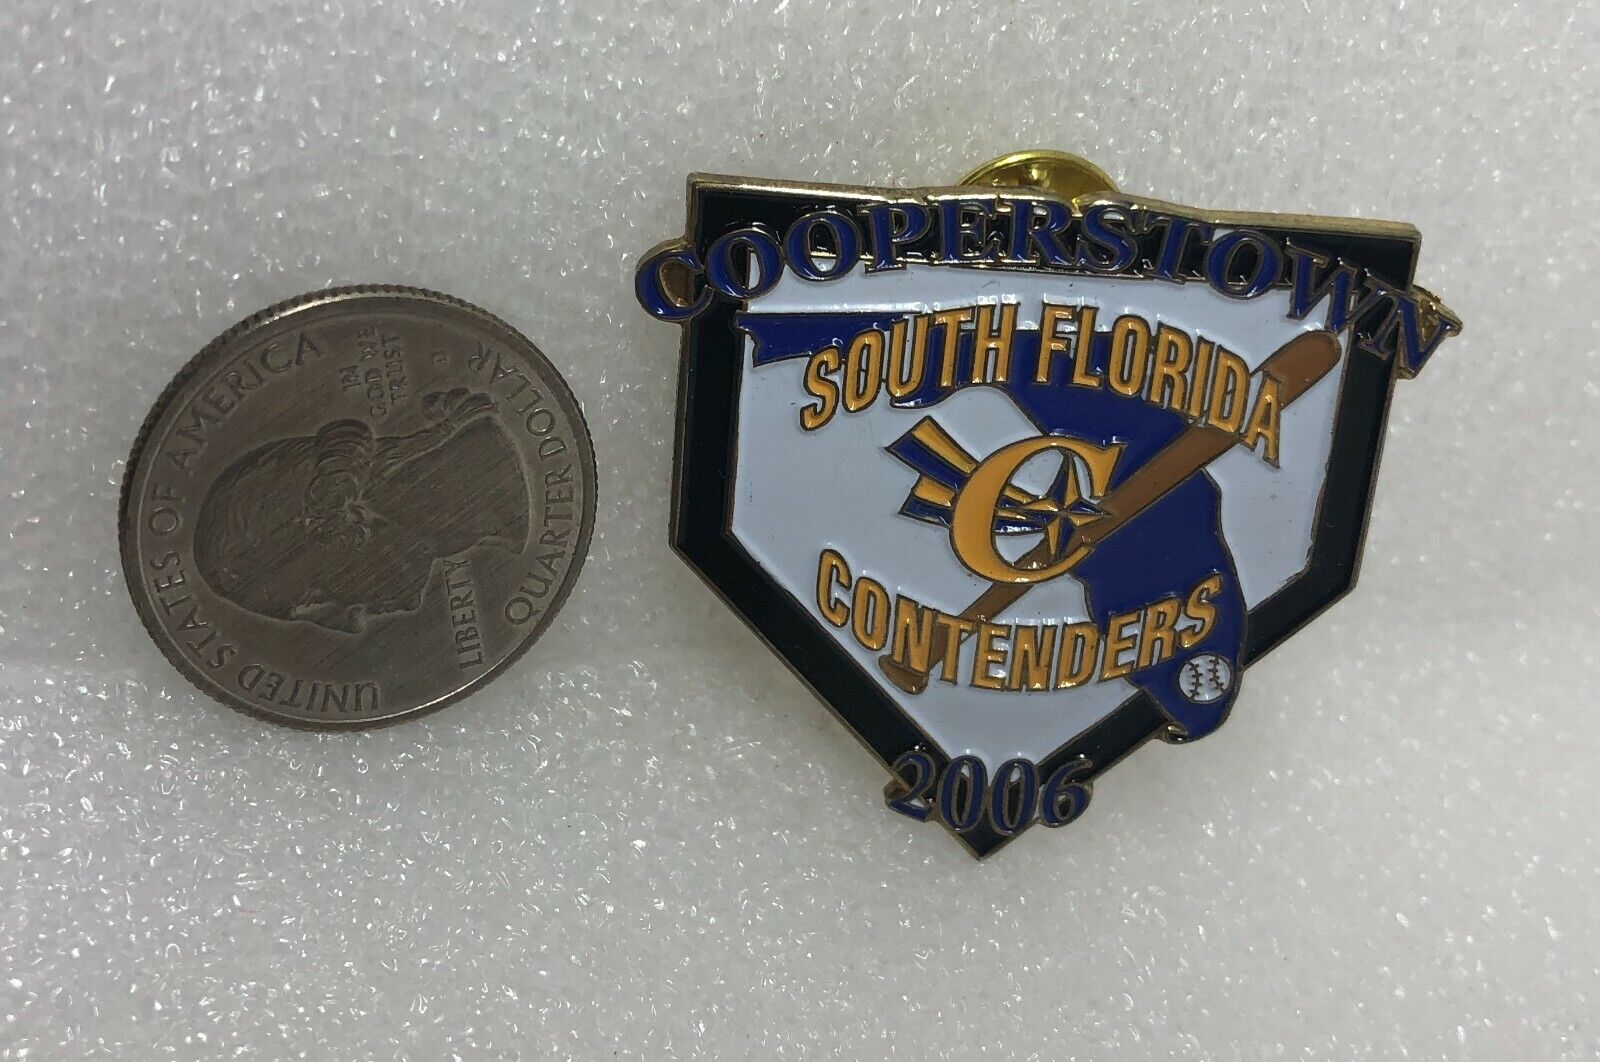 2006 Cooperstown South Florida Contenders Baseball Pin